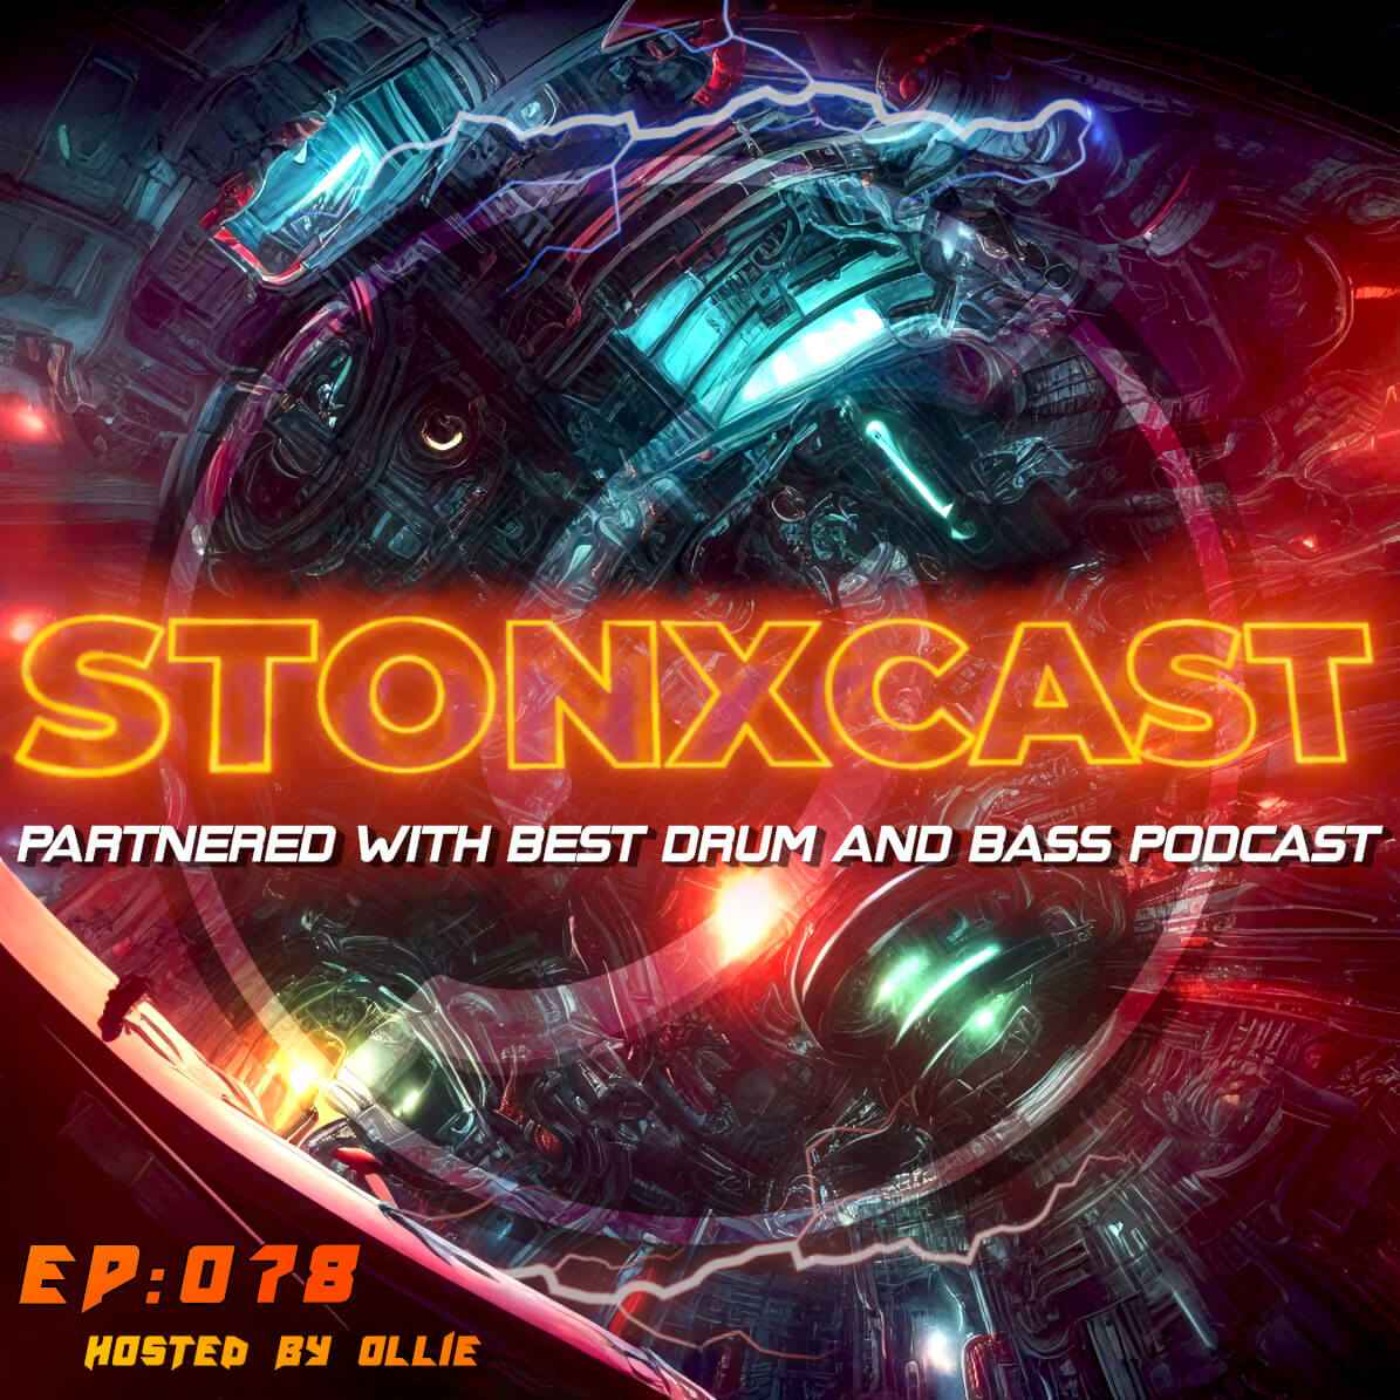 Stonxcast EP:078 - Hosted by Ollie Artwork